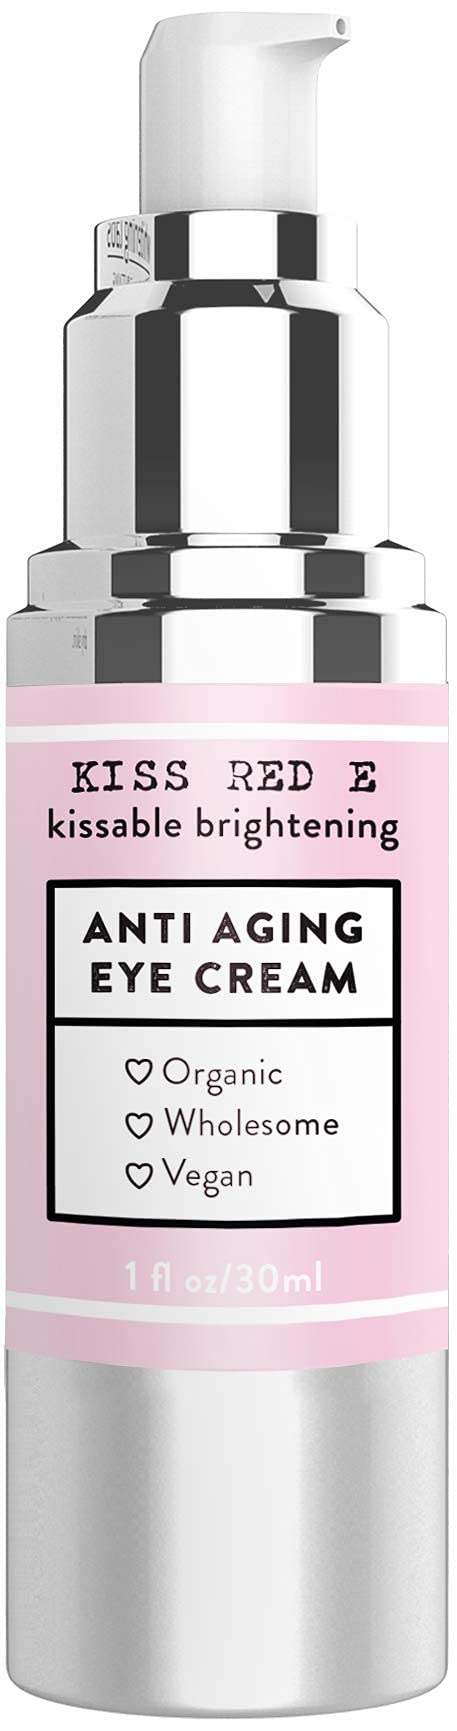 KissRedE Anti-Aging Eye Cream for Dark Circles, Puffiness, Fine Lines, and Wrinkles - Fragrance-Free, 1 Fl Oz